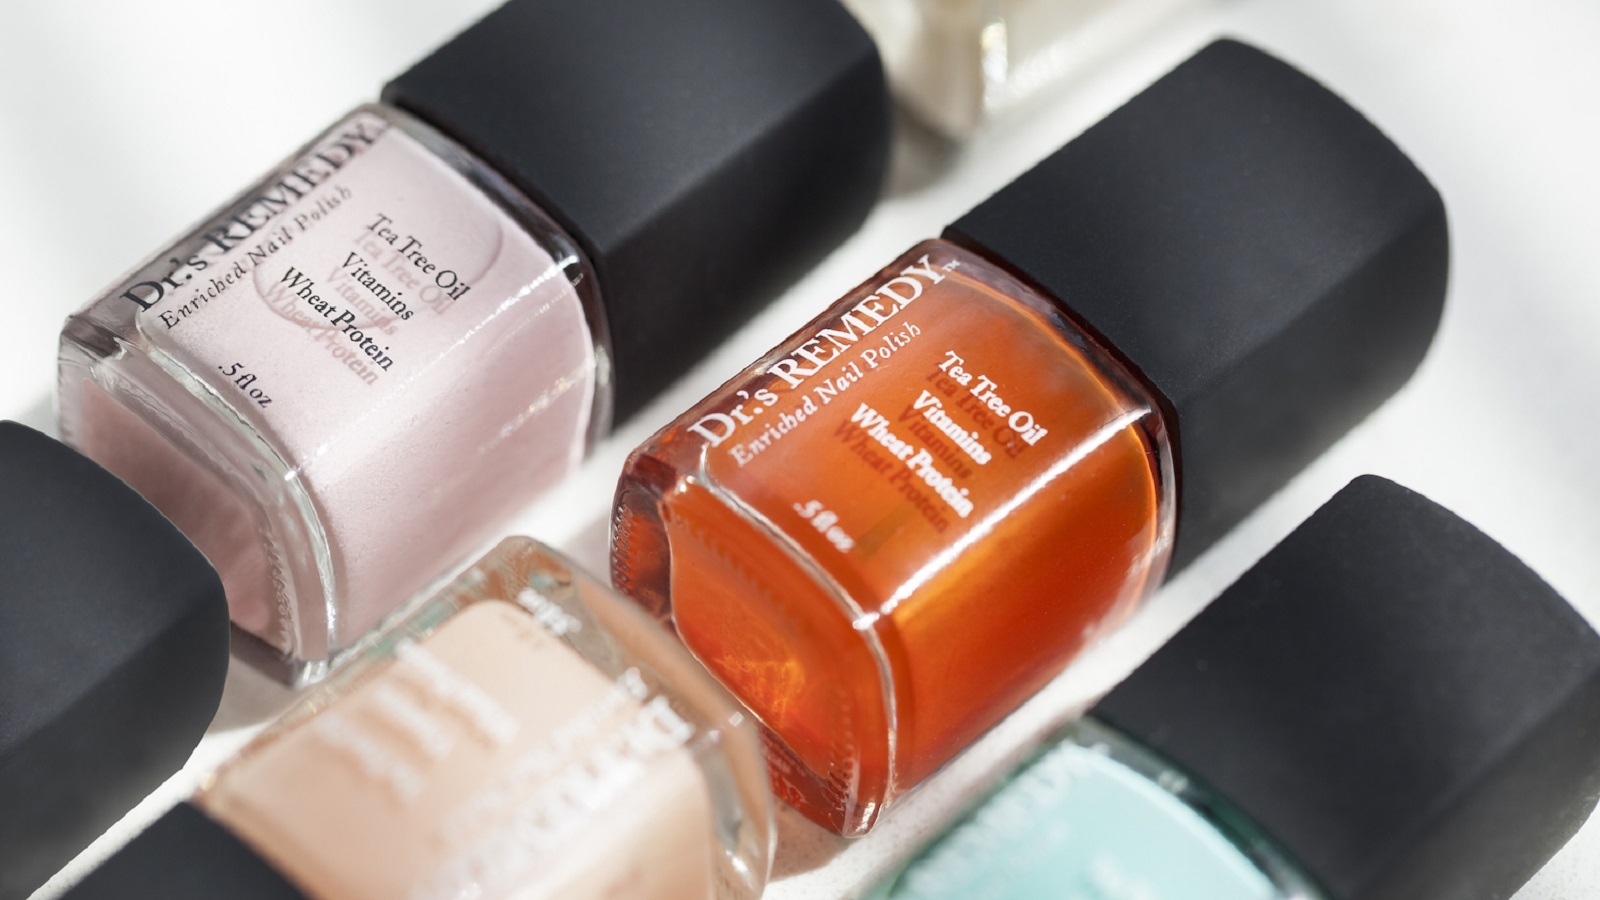 Dr. Remedy Nail Polish Review: *Pros and Cons* Does It Really Toxin-Free and Long-Lasting?